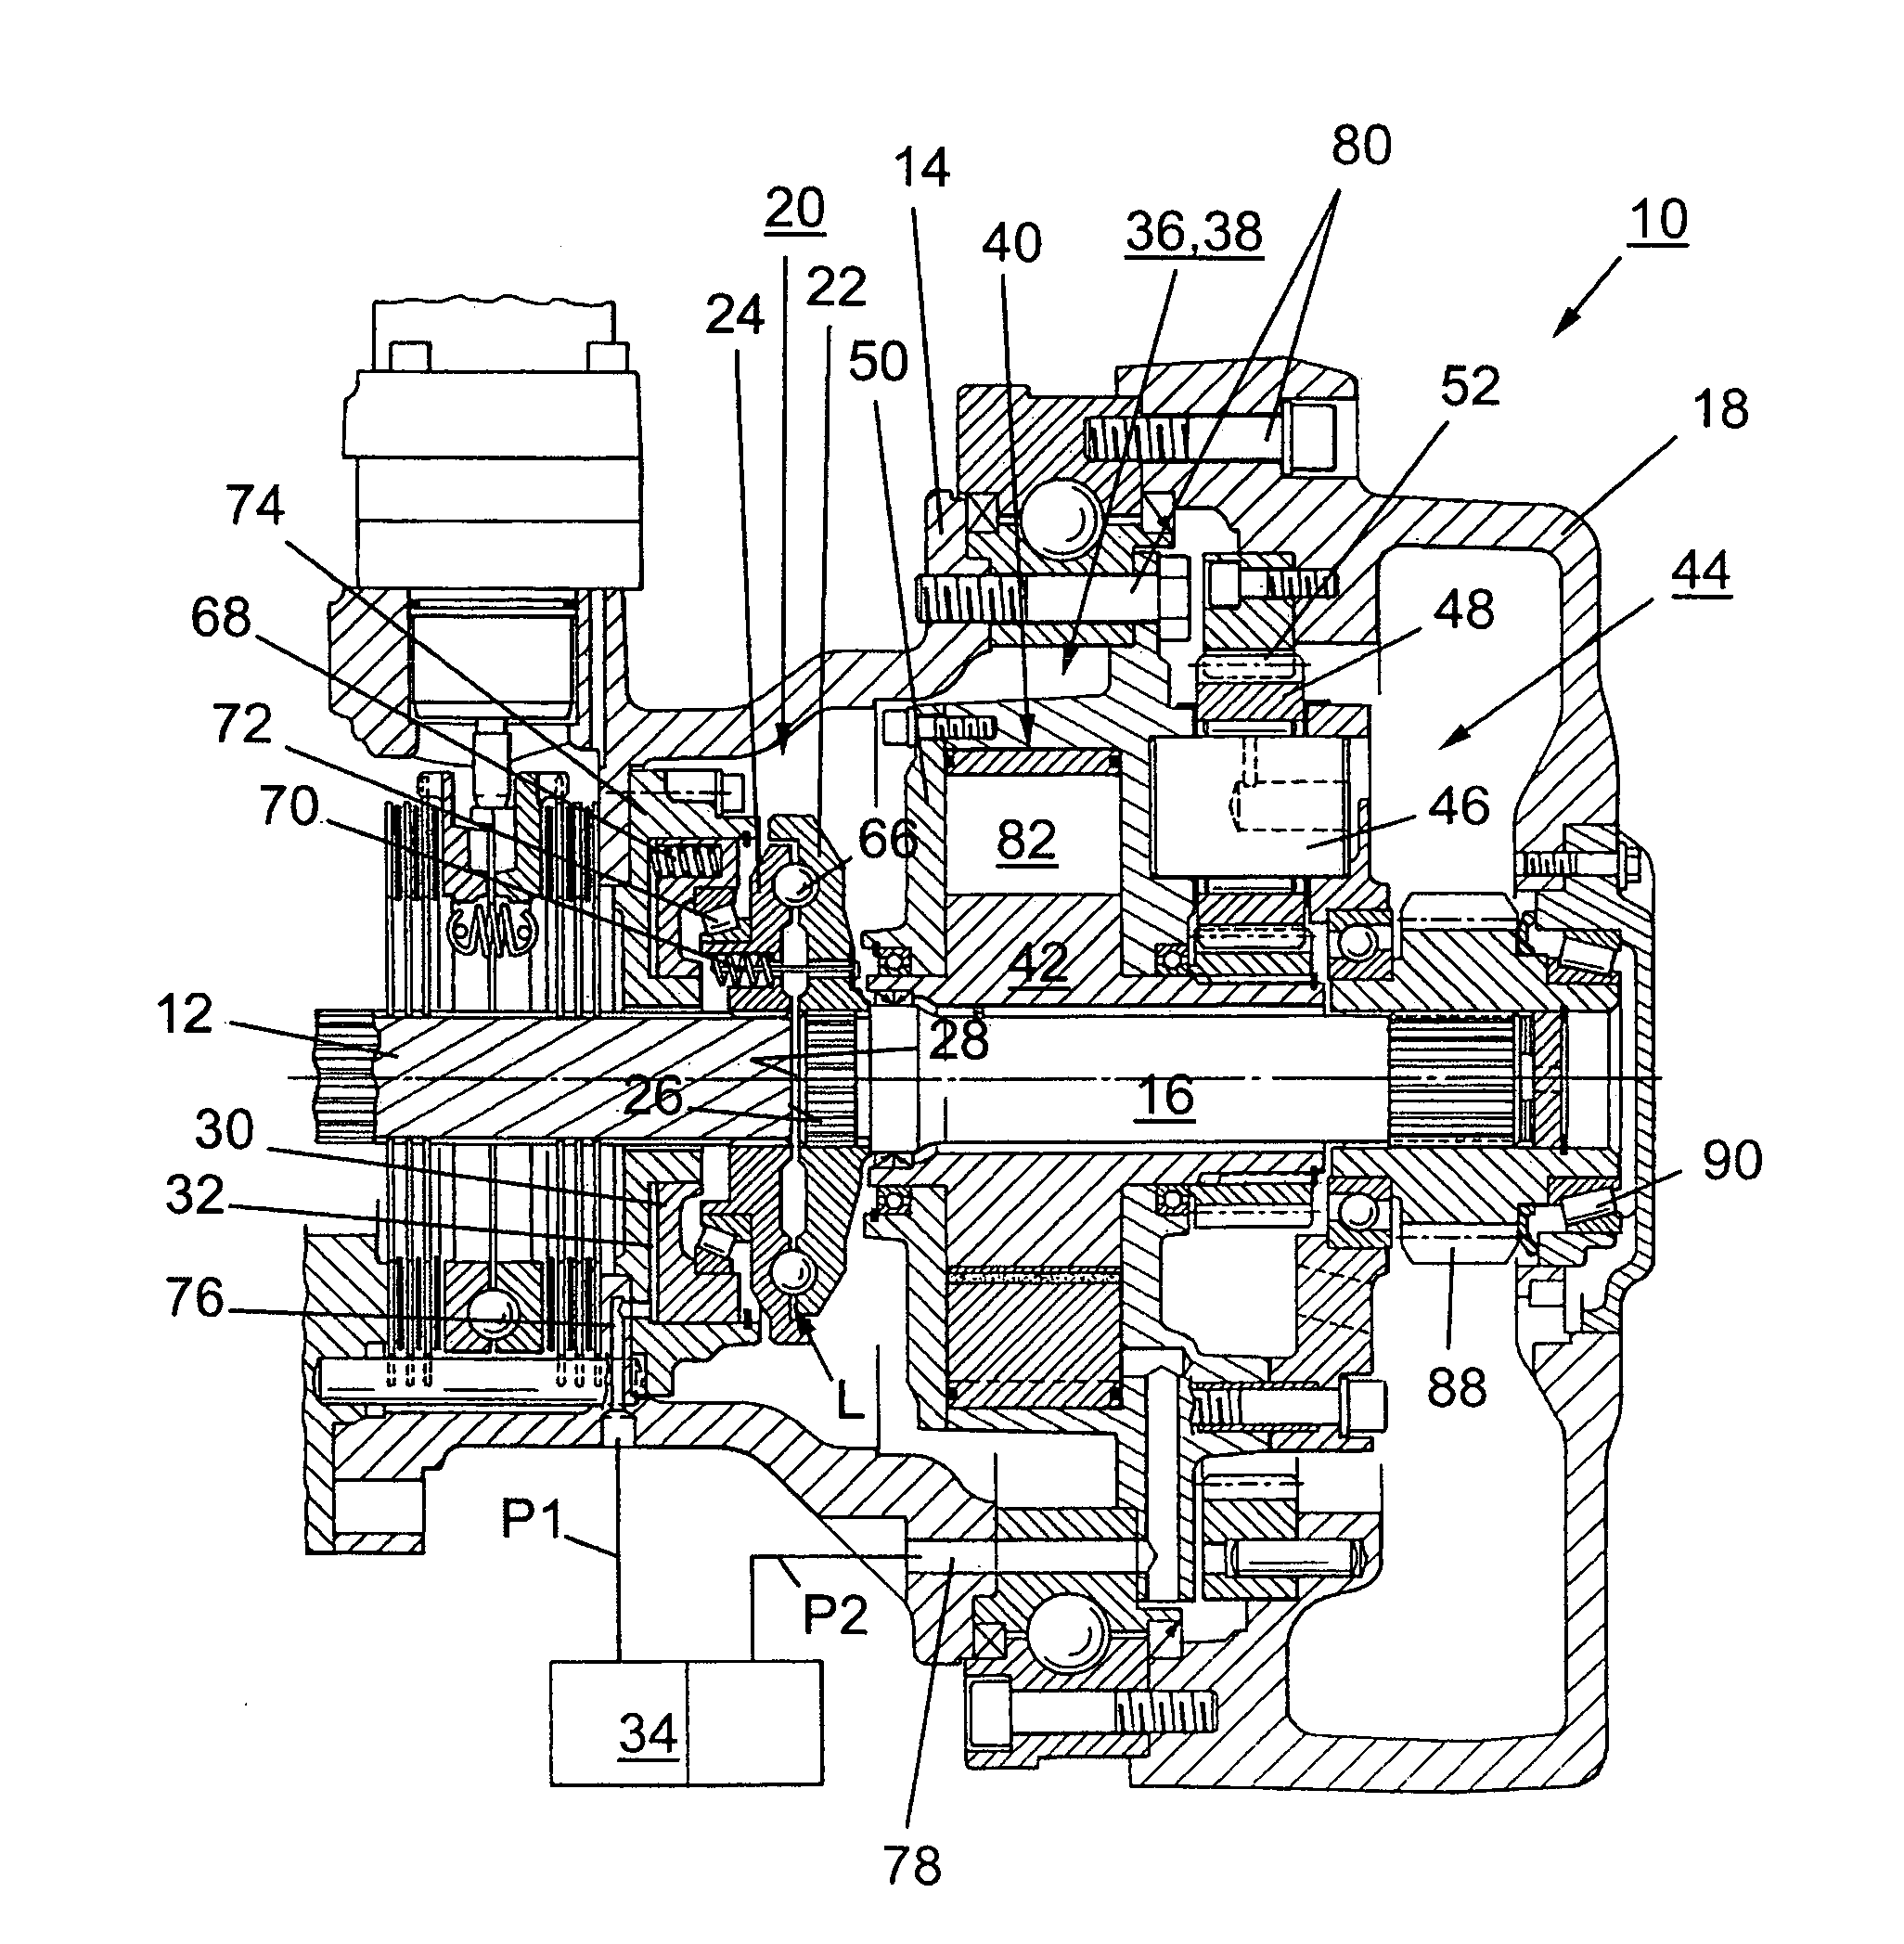 Device and method for continuous regulation of the erection of a tandem axle